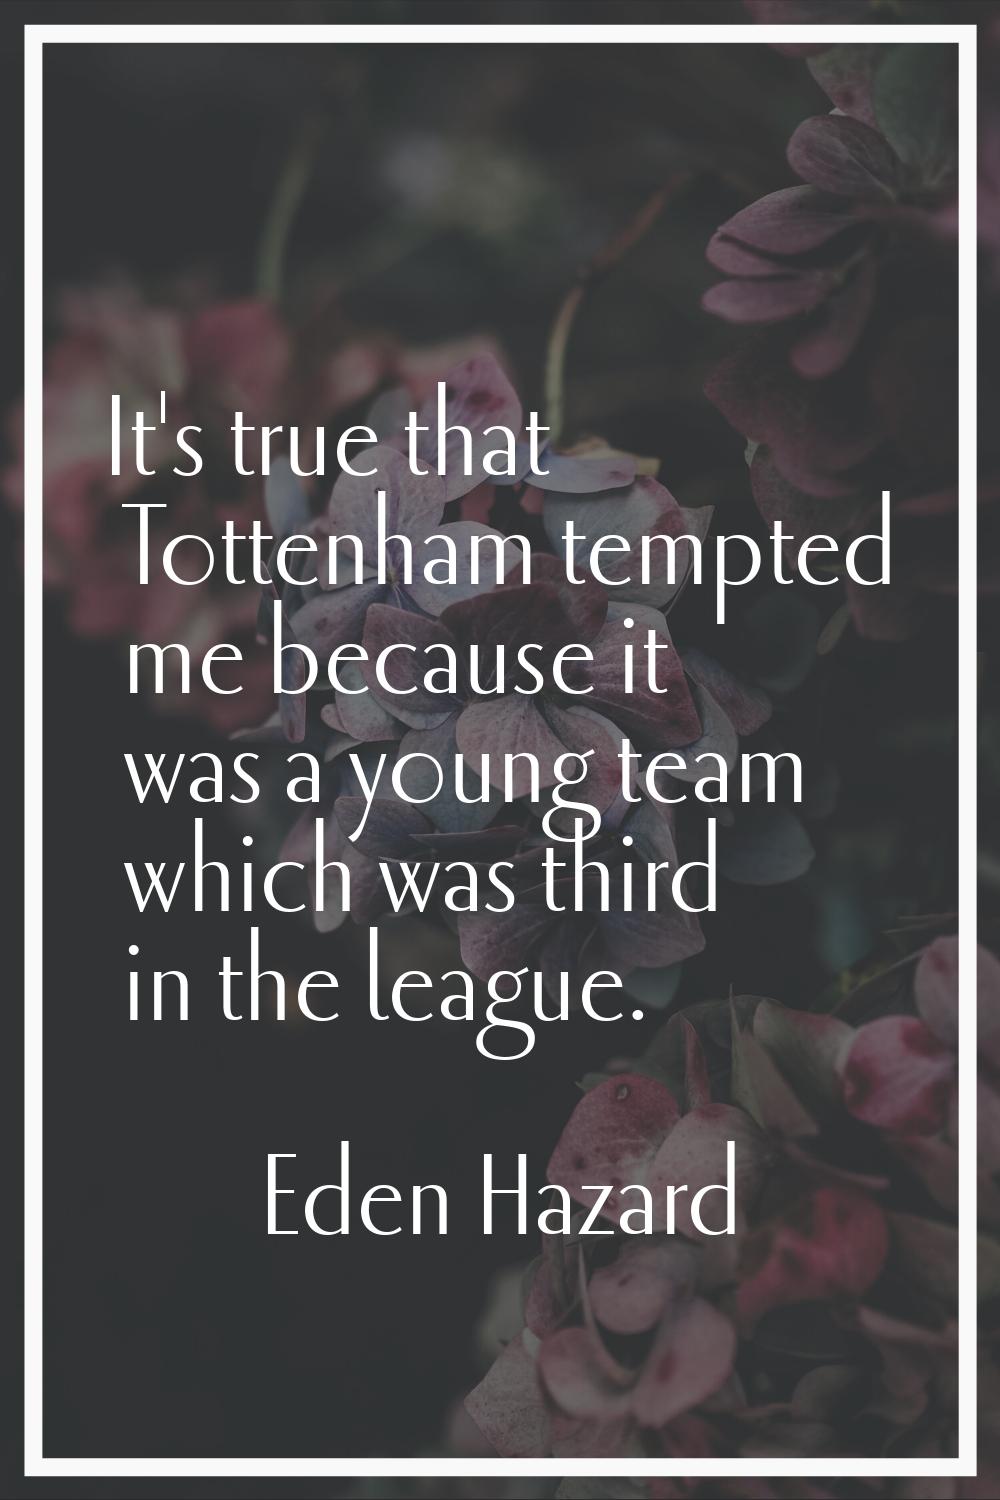 It's true that Tottenham tempted me because it was a young team which was third in the league.